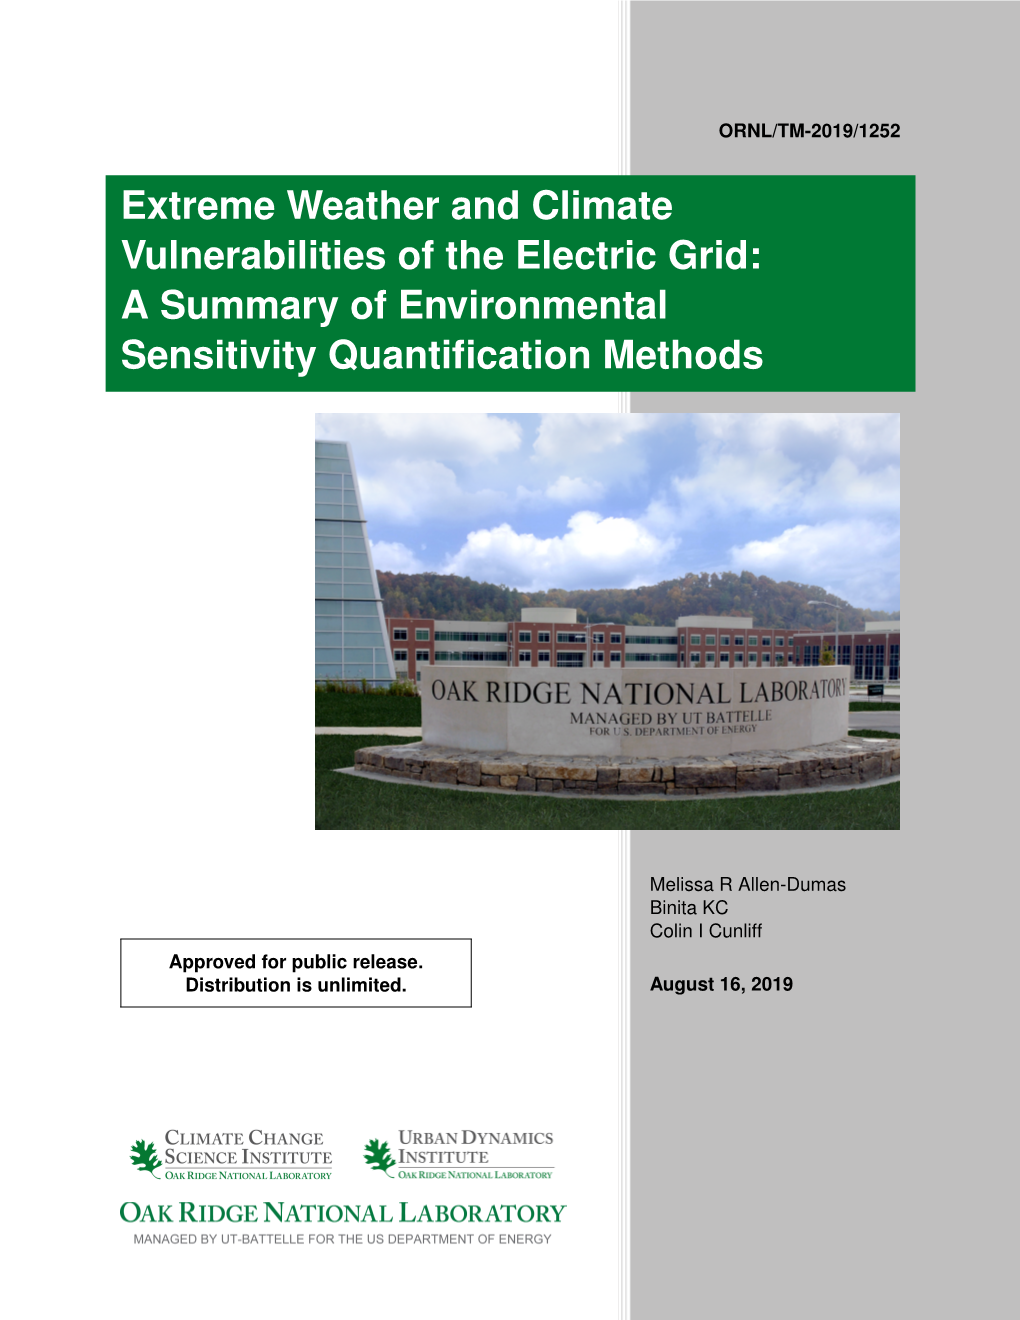 Extreme Weather and Climate Vulnerabilities of the Electric Grid: a Summary of Environmental Sensitivity Quantiﬁcation Methods